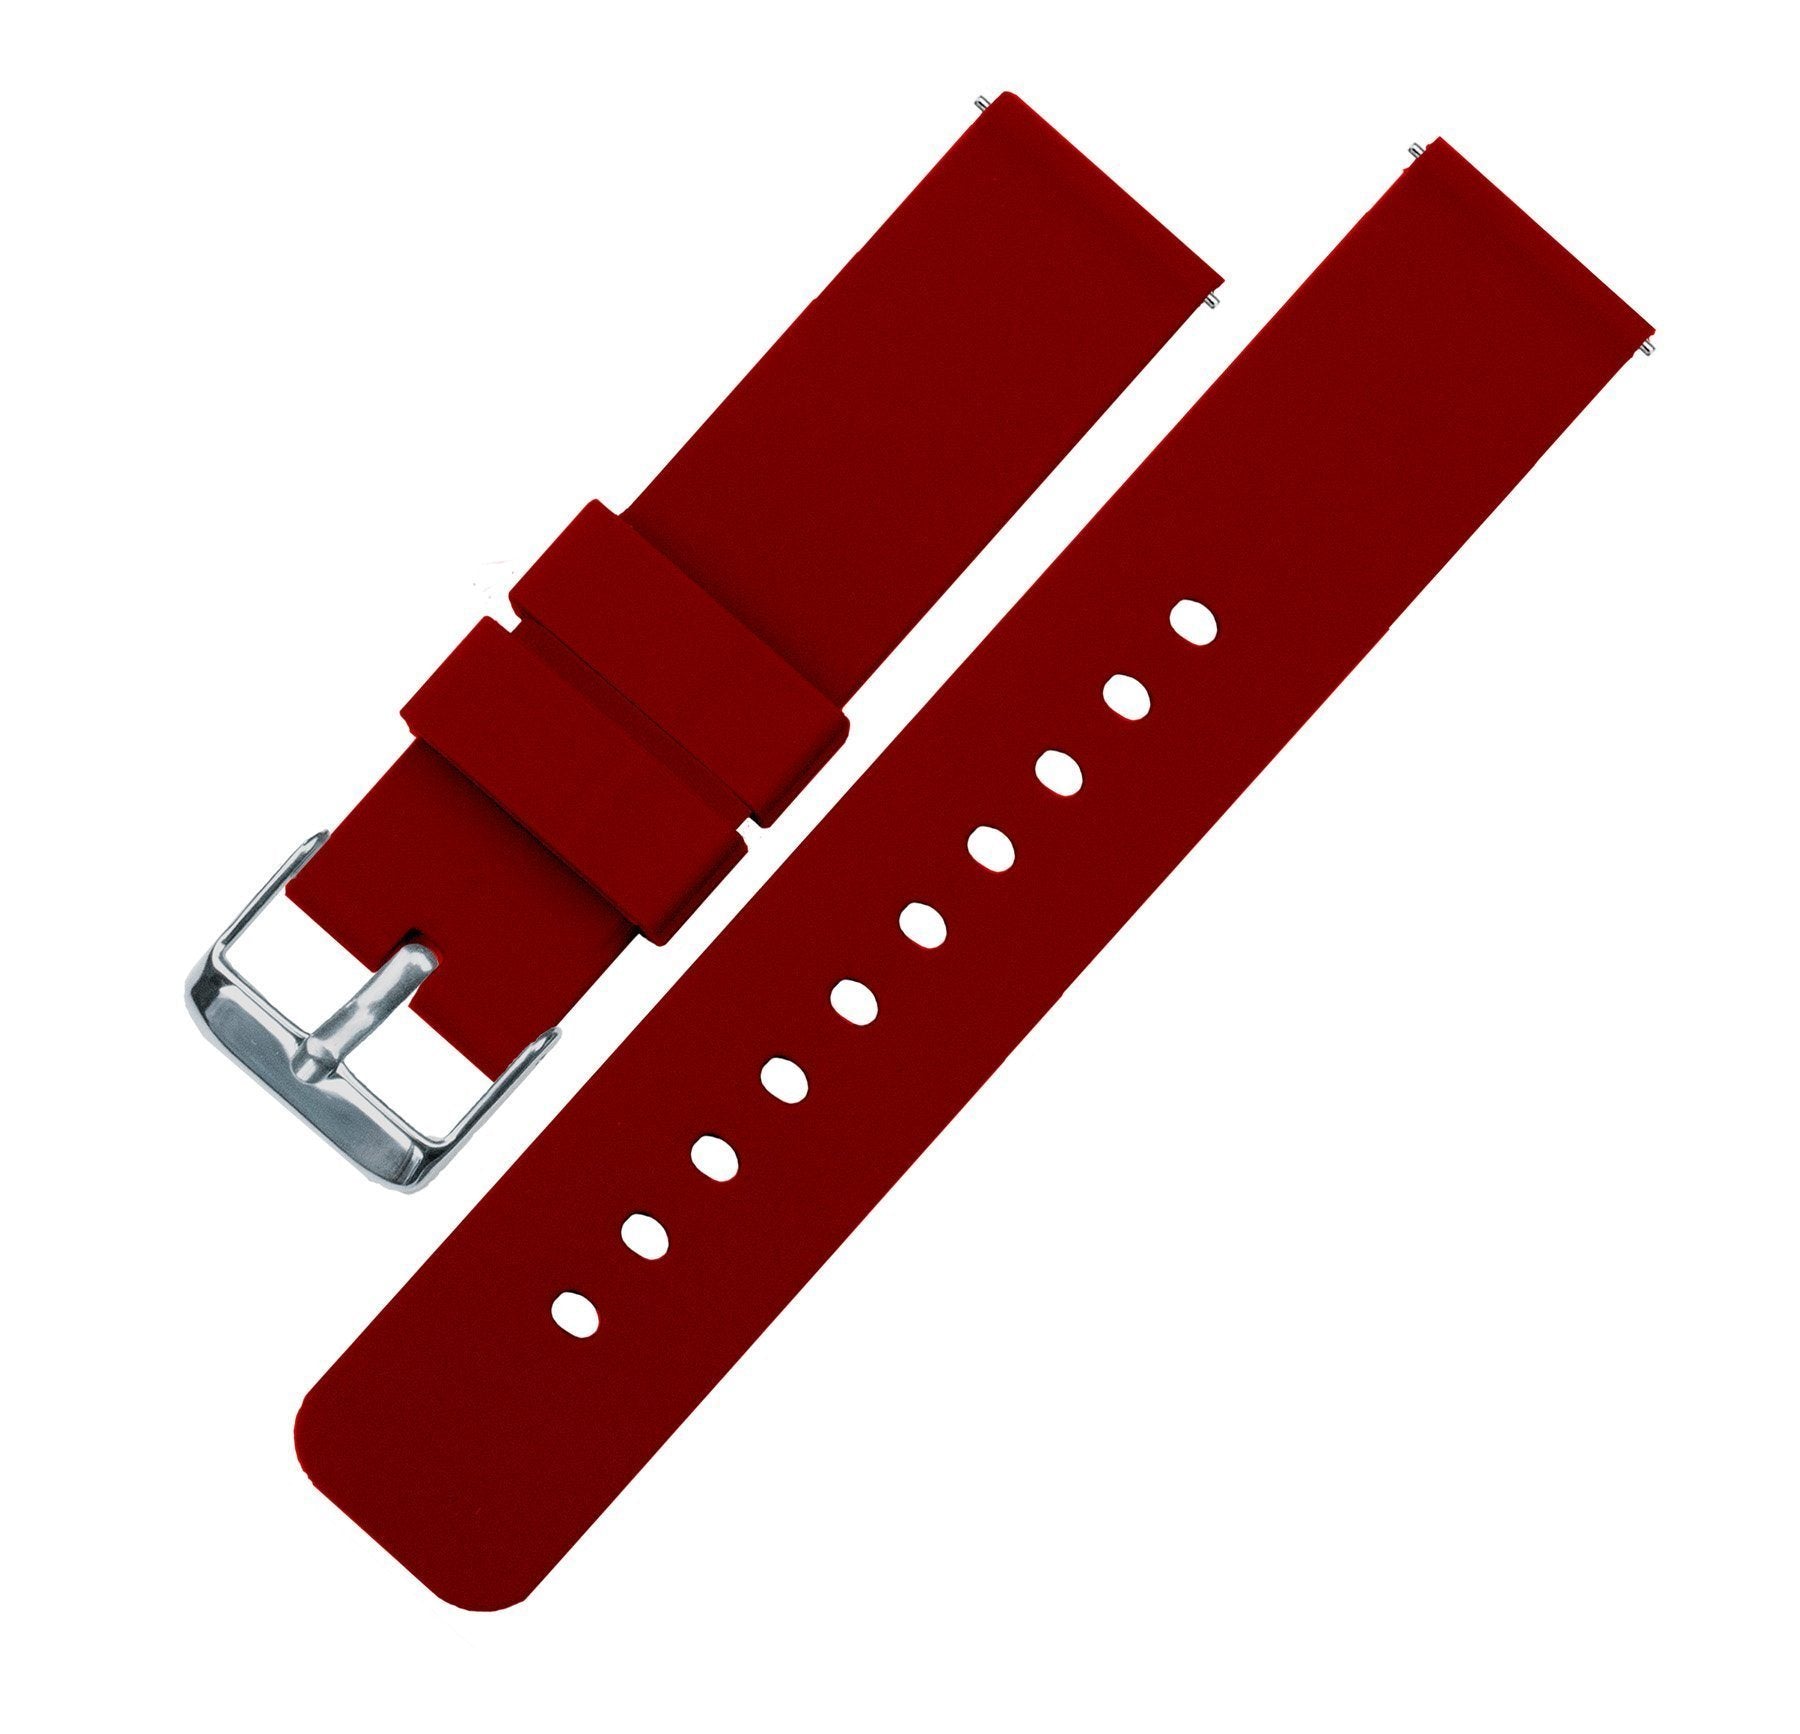 Pebble Smart Watches | Silicone | Crimson Red - Barton Watch Bands